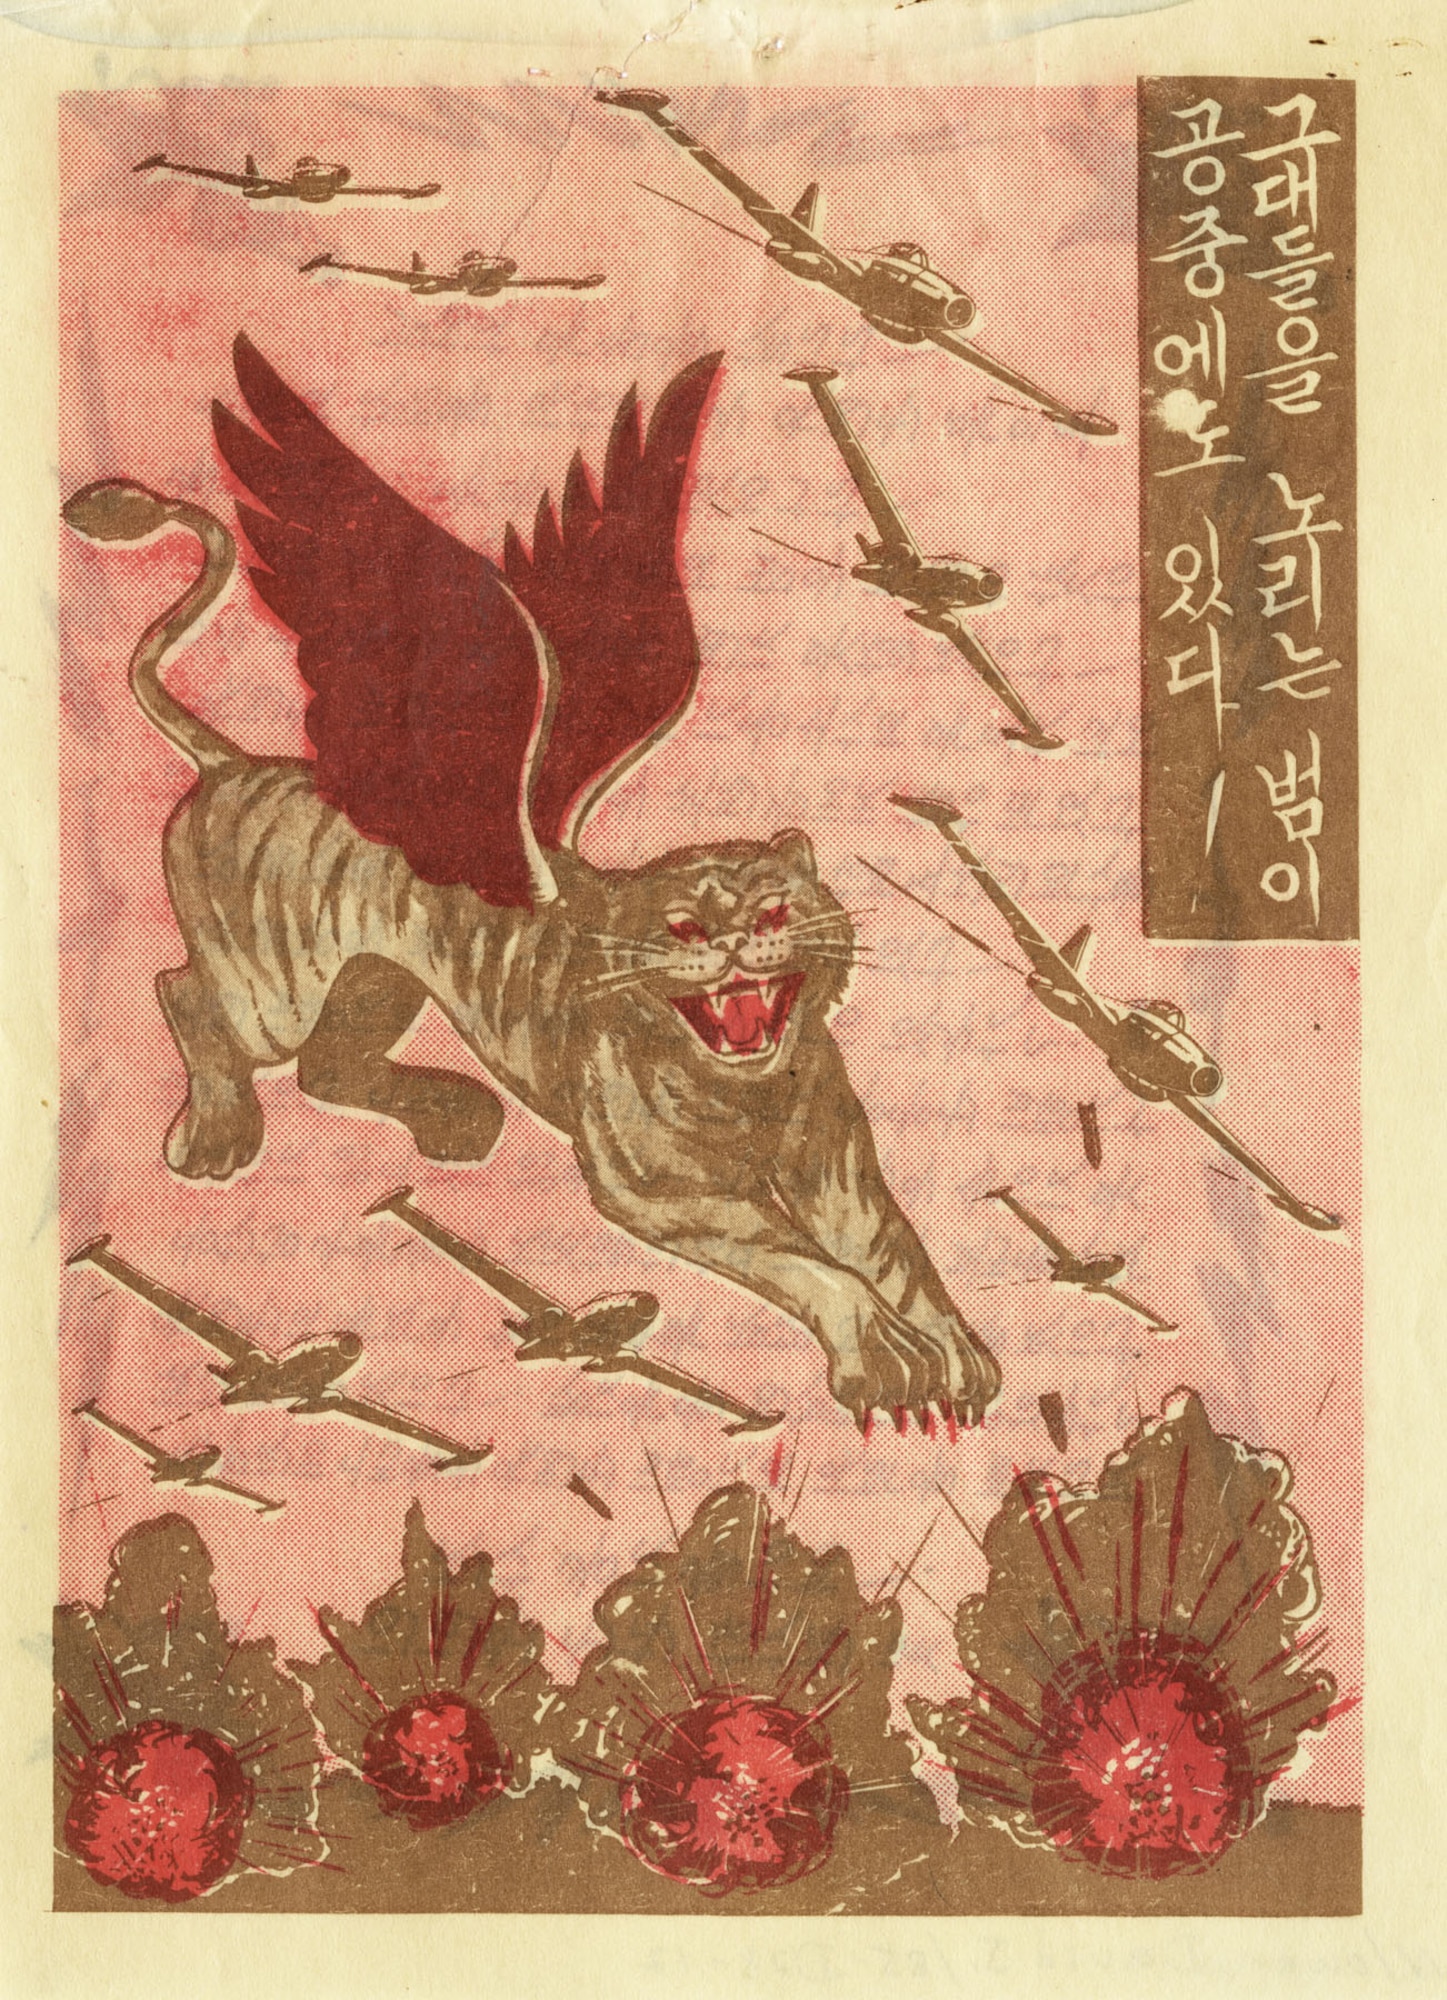 This leaflet titled “The Flying Tigers of the Free World Strike Again!” was dropped on North Korean troops immediately following heavy airstrikes. It taunted the communists’ lack of air support and warned of a futile and inevitable death unless a soldier surrendered. (U.S. Air Force photo)